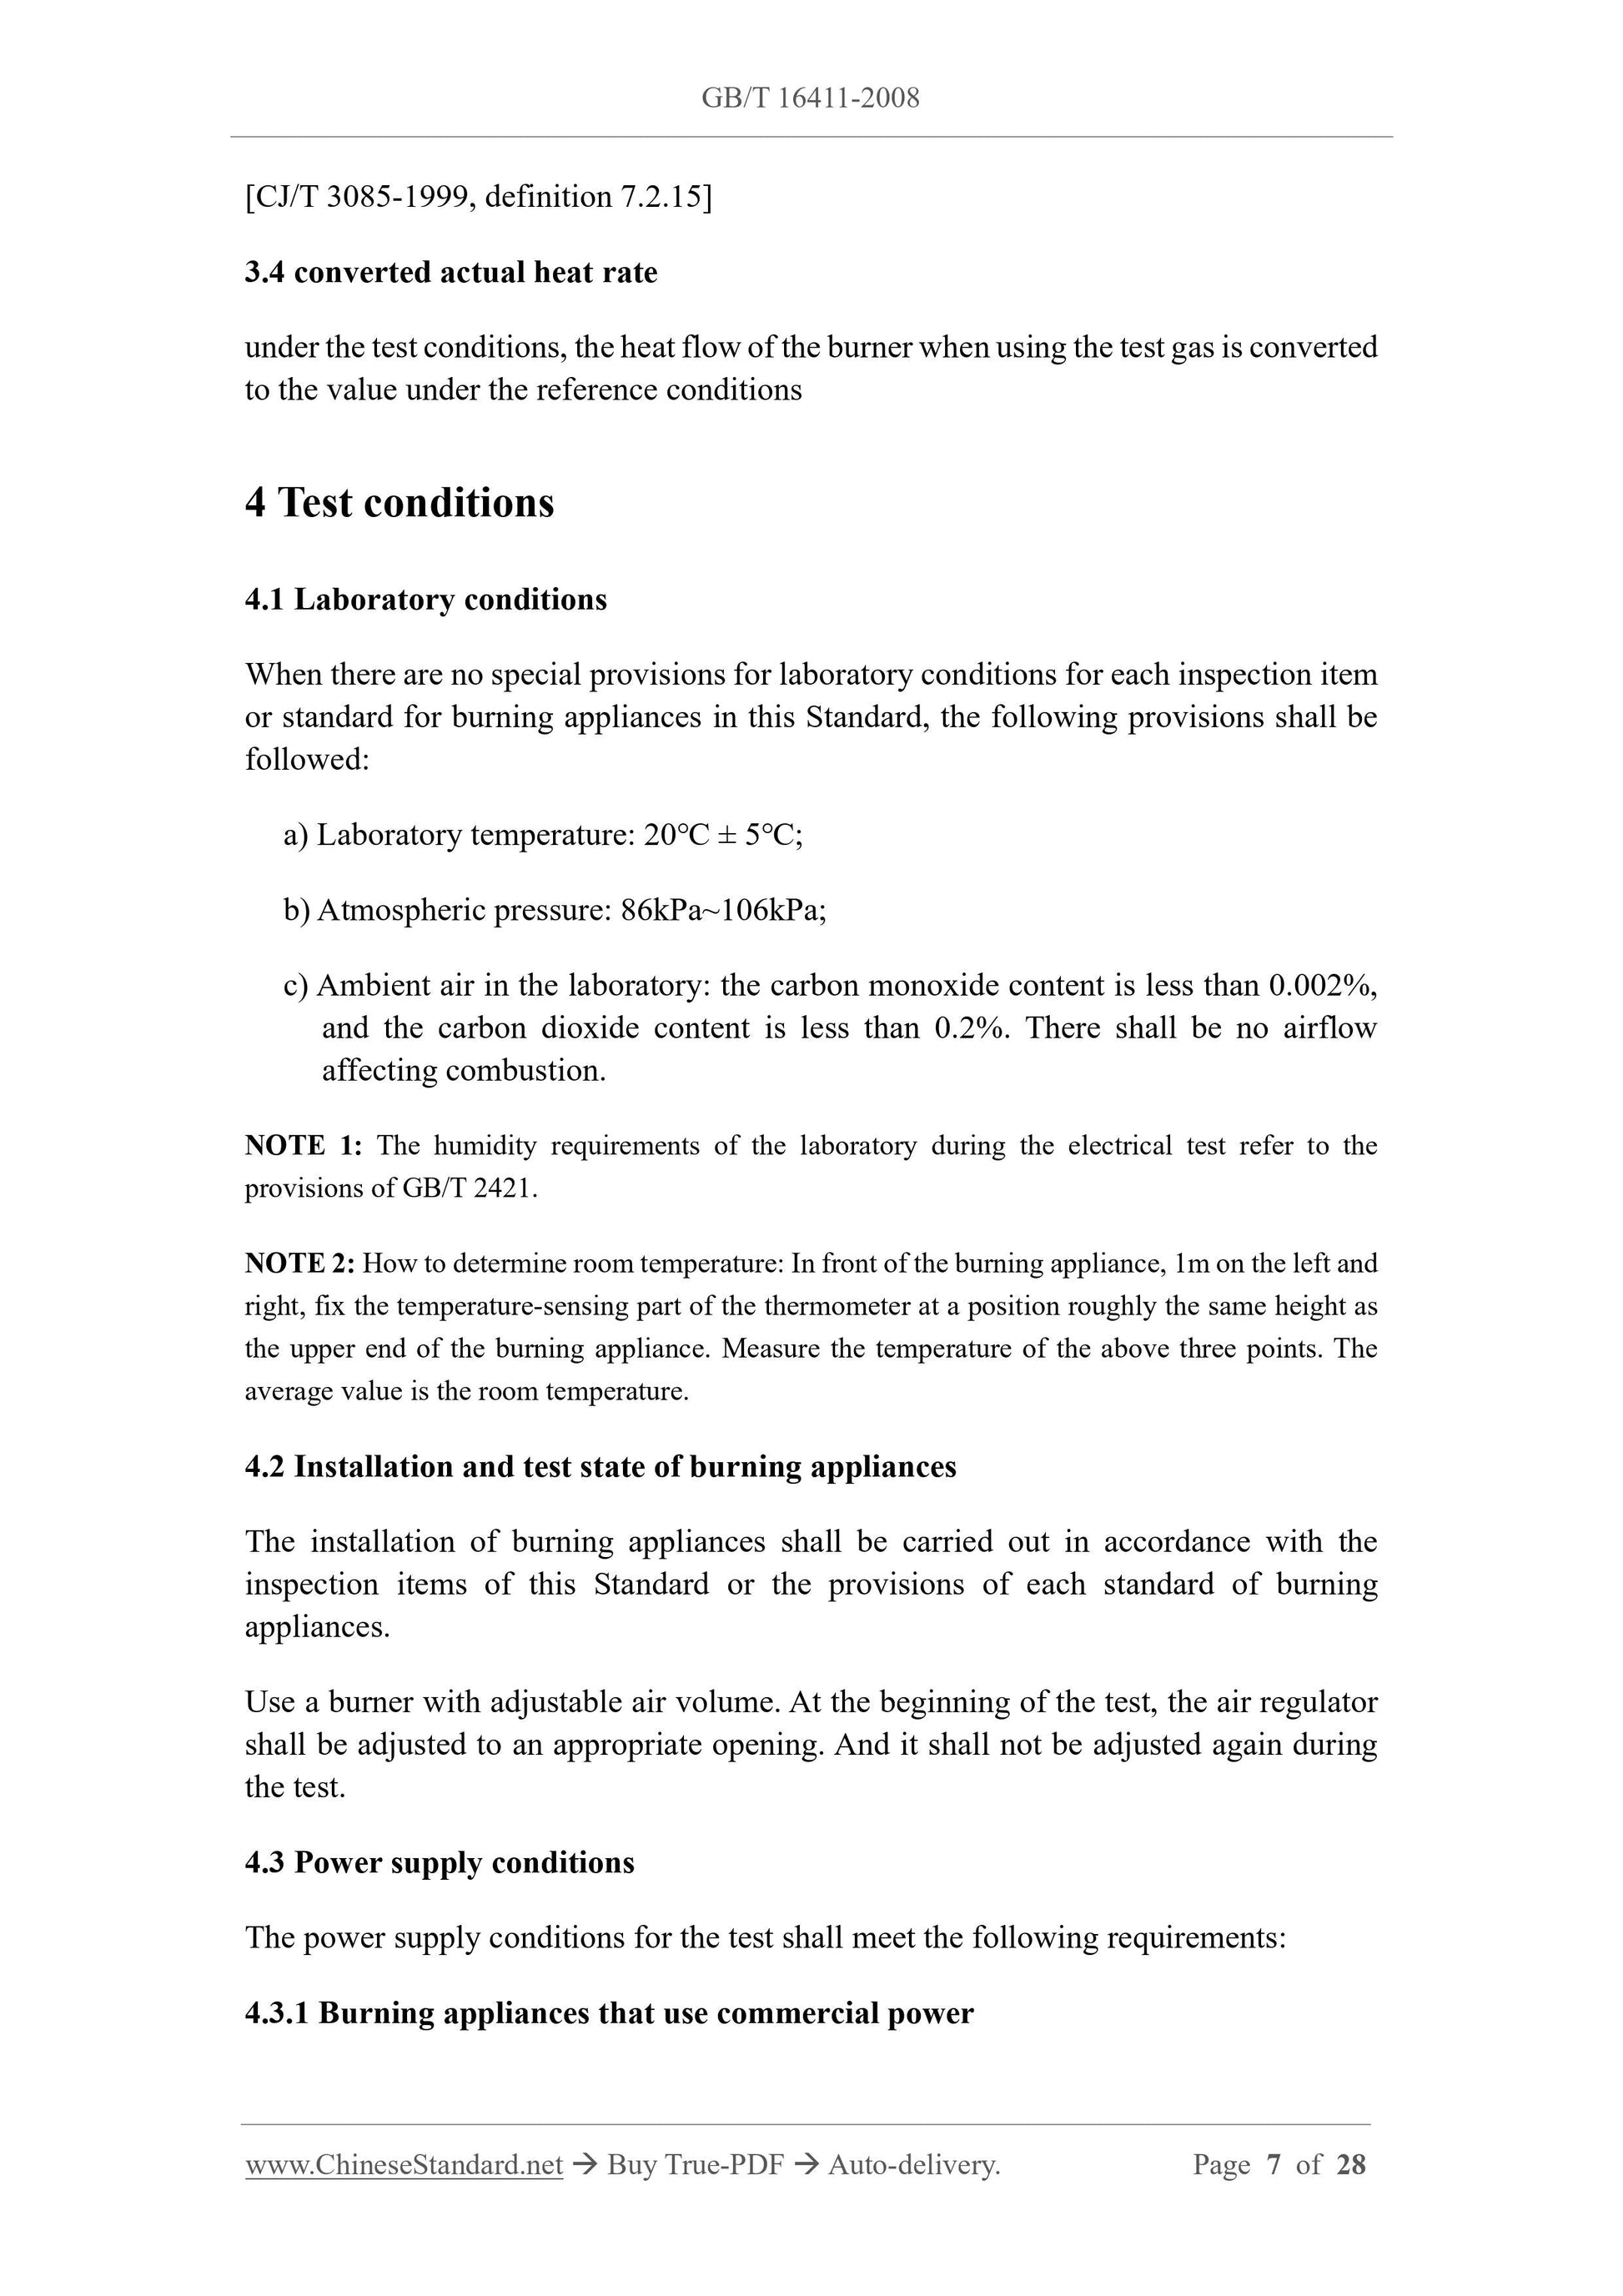 GB/T 16411-2008 Page 5